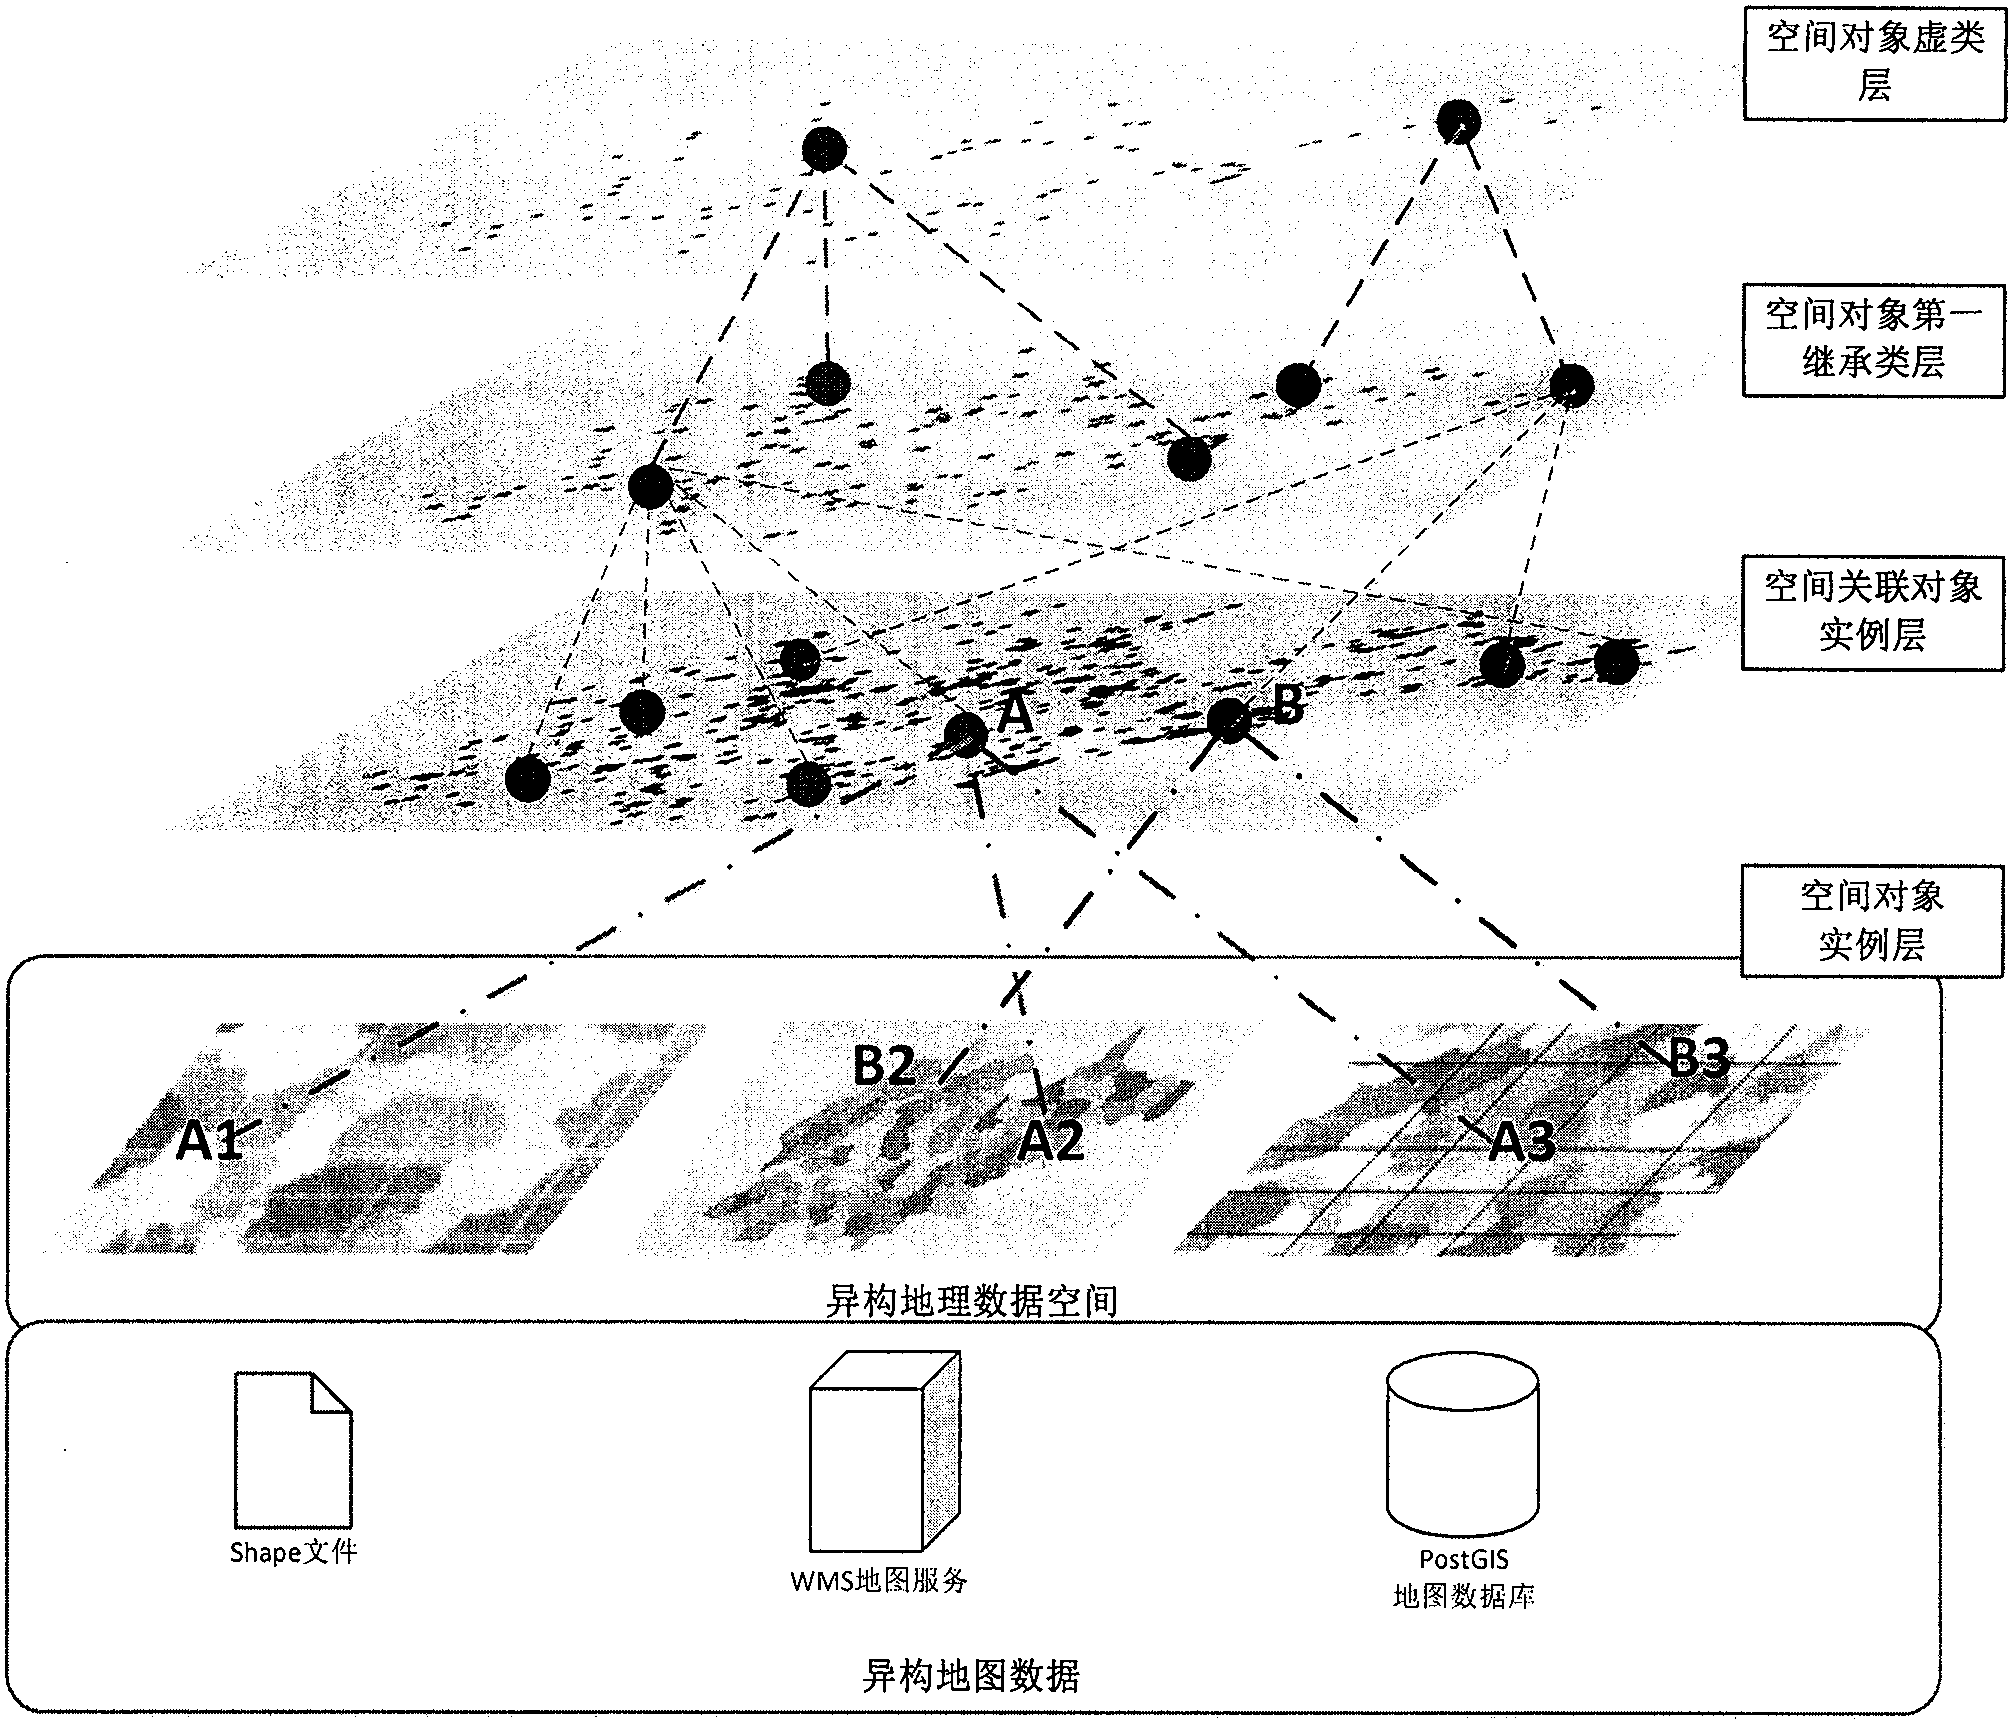 Heterogeneous geospatial data management technique based on spatial object generalized model and grid body indexing